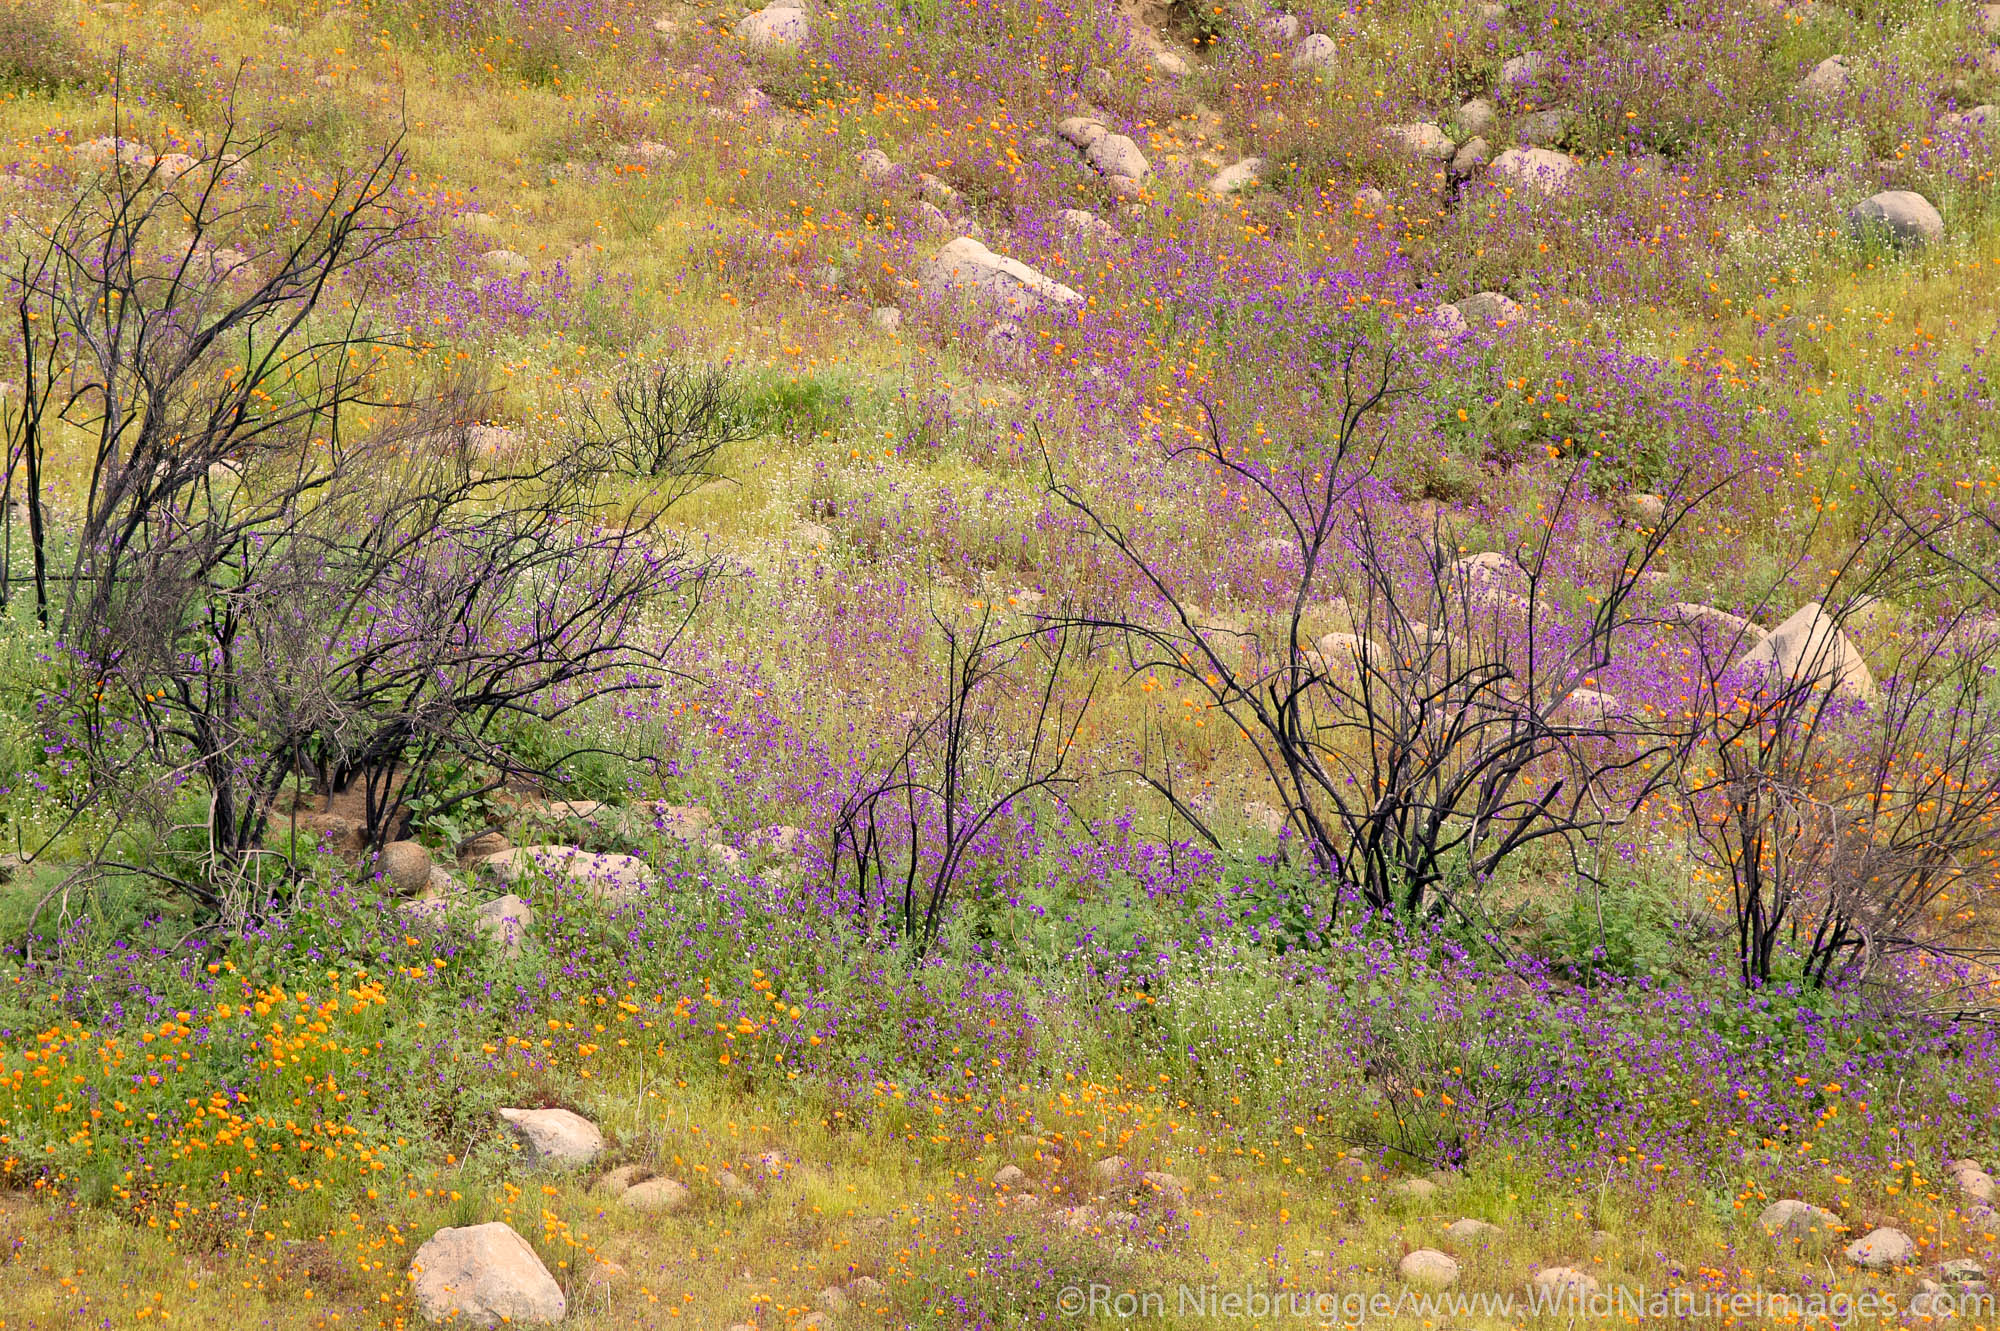 Spring wildflowers among dead branches from a recent wild fire near Lake Elsinore, California.